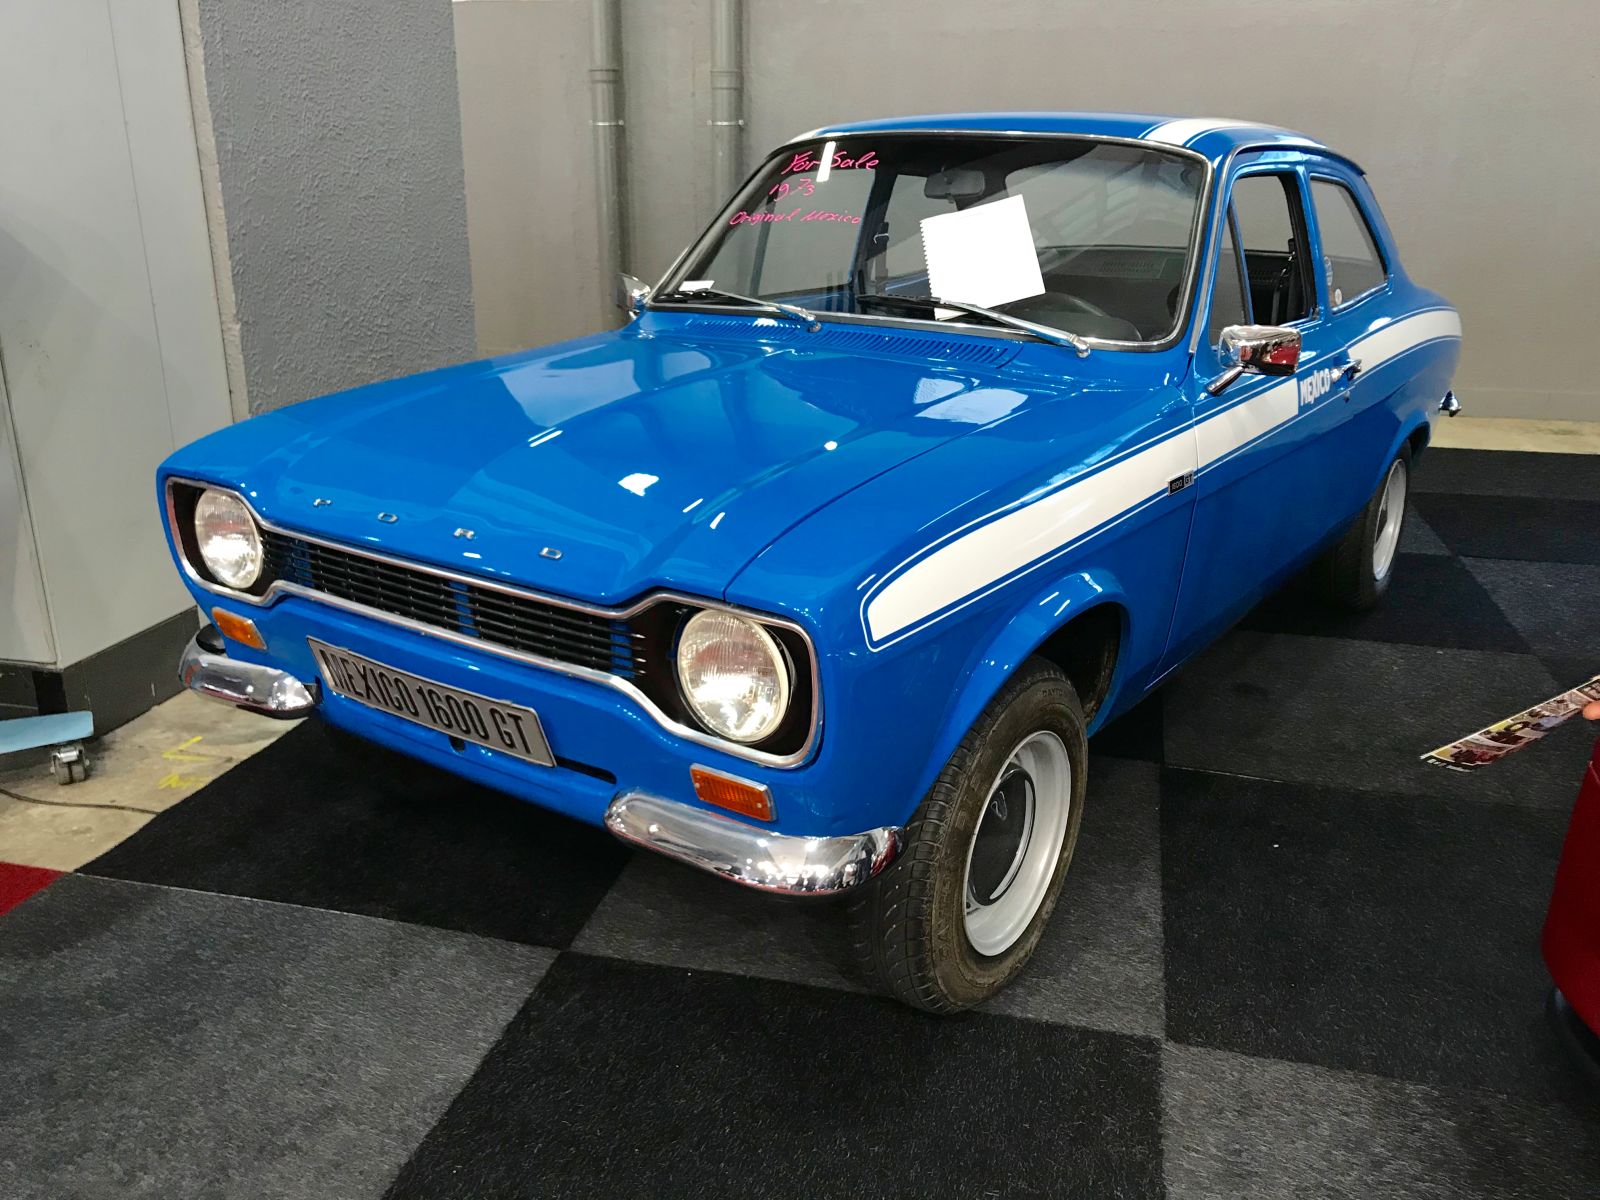 A real Ford Escort Mexico